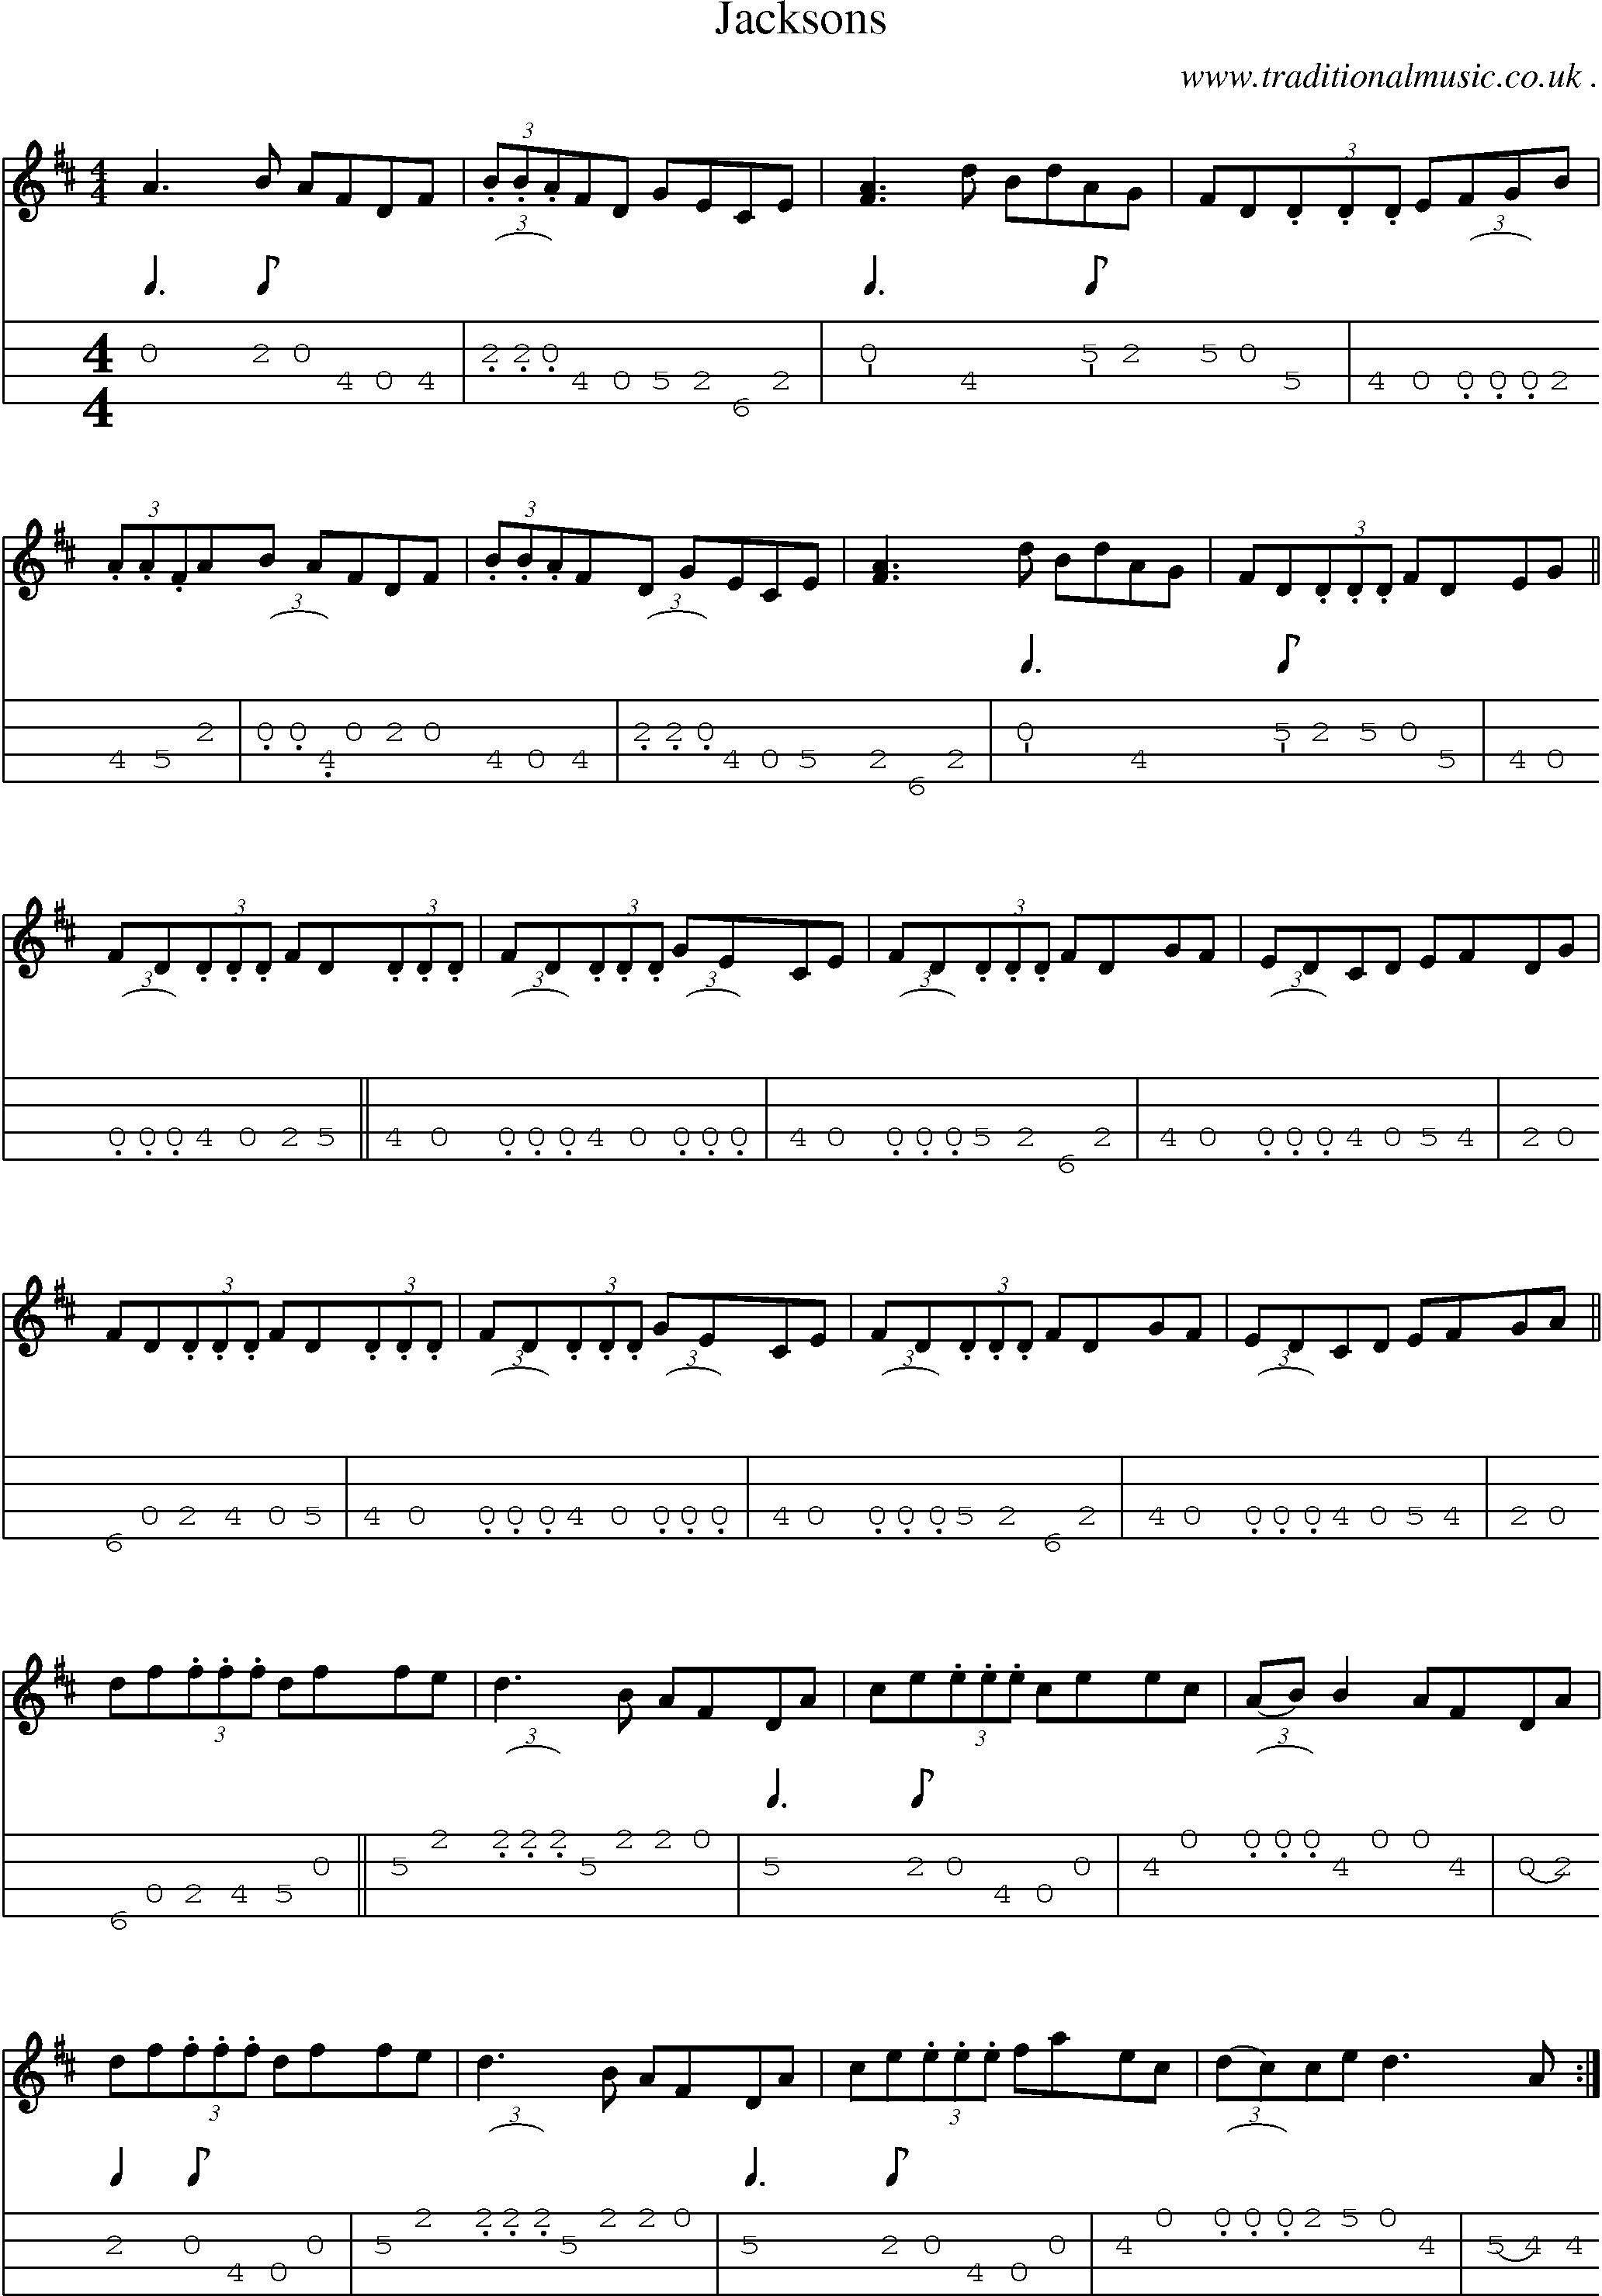 Sheet-Music and Mandolin Tabs for Jacksons